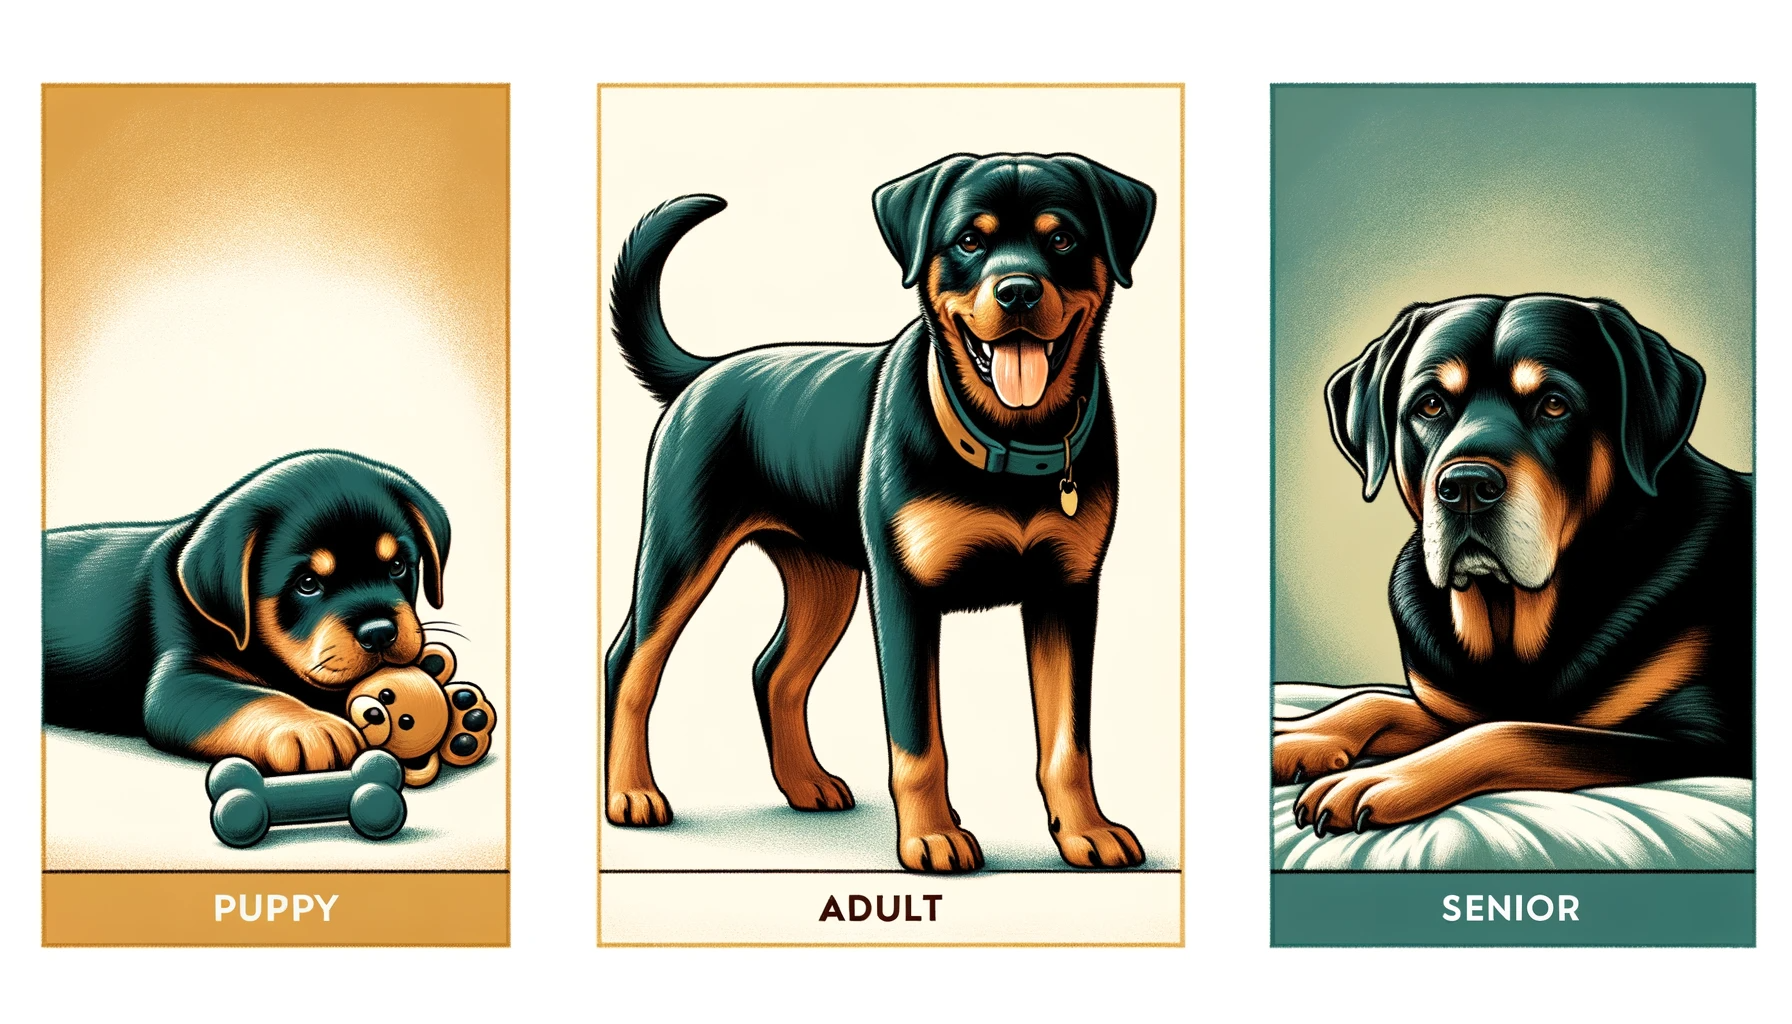 A Rottweiler Lab Mix shown as a playful pup, a robust adult, and a wise senior, signifying the different life stages and health concerns to be aware of